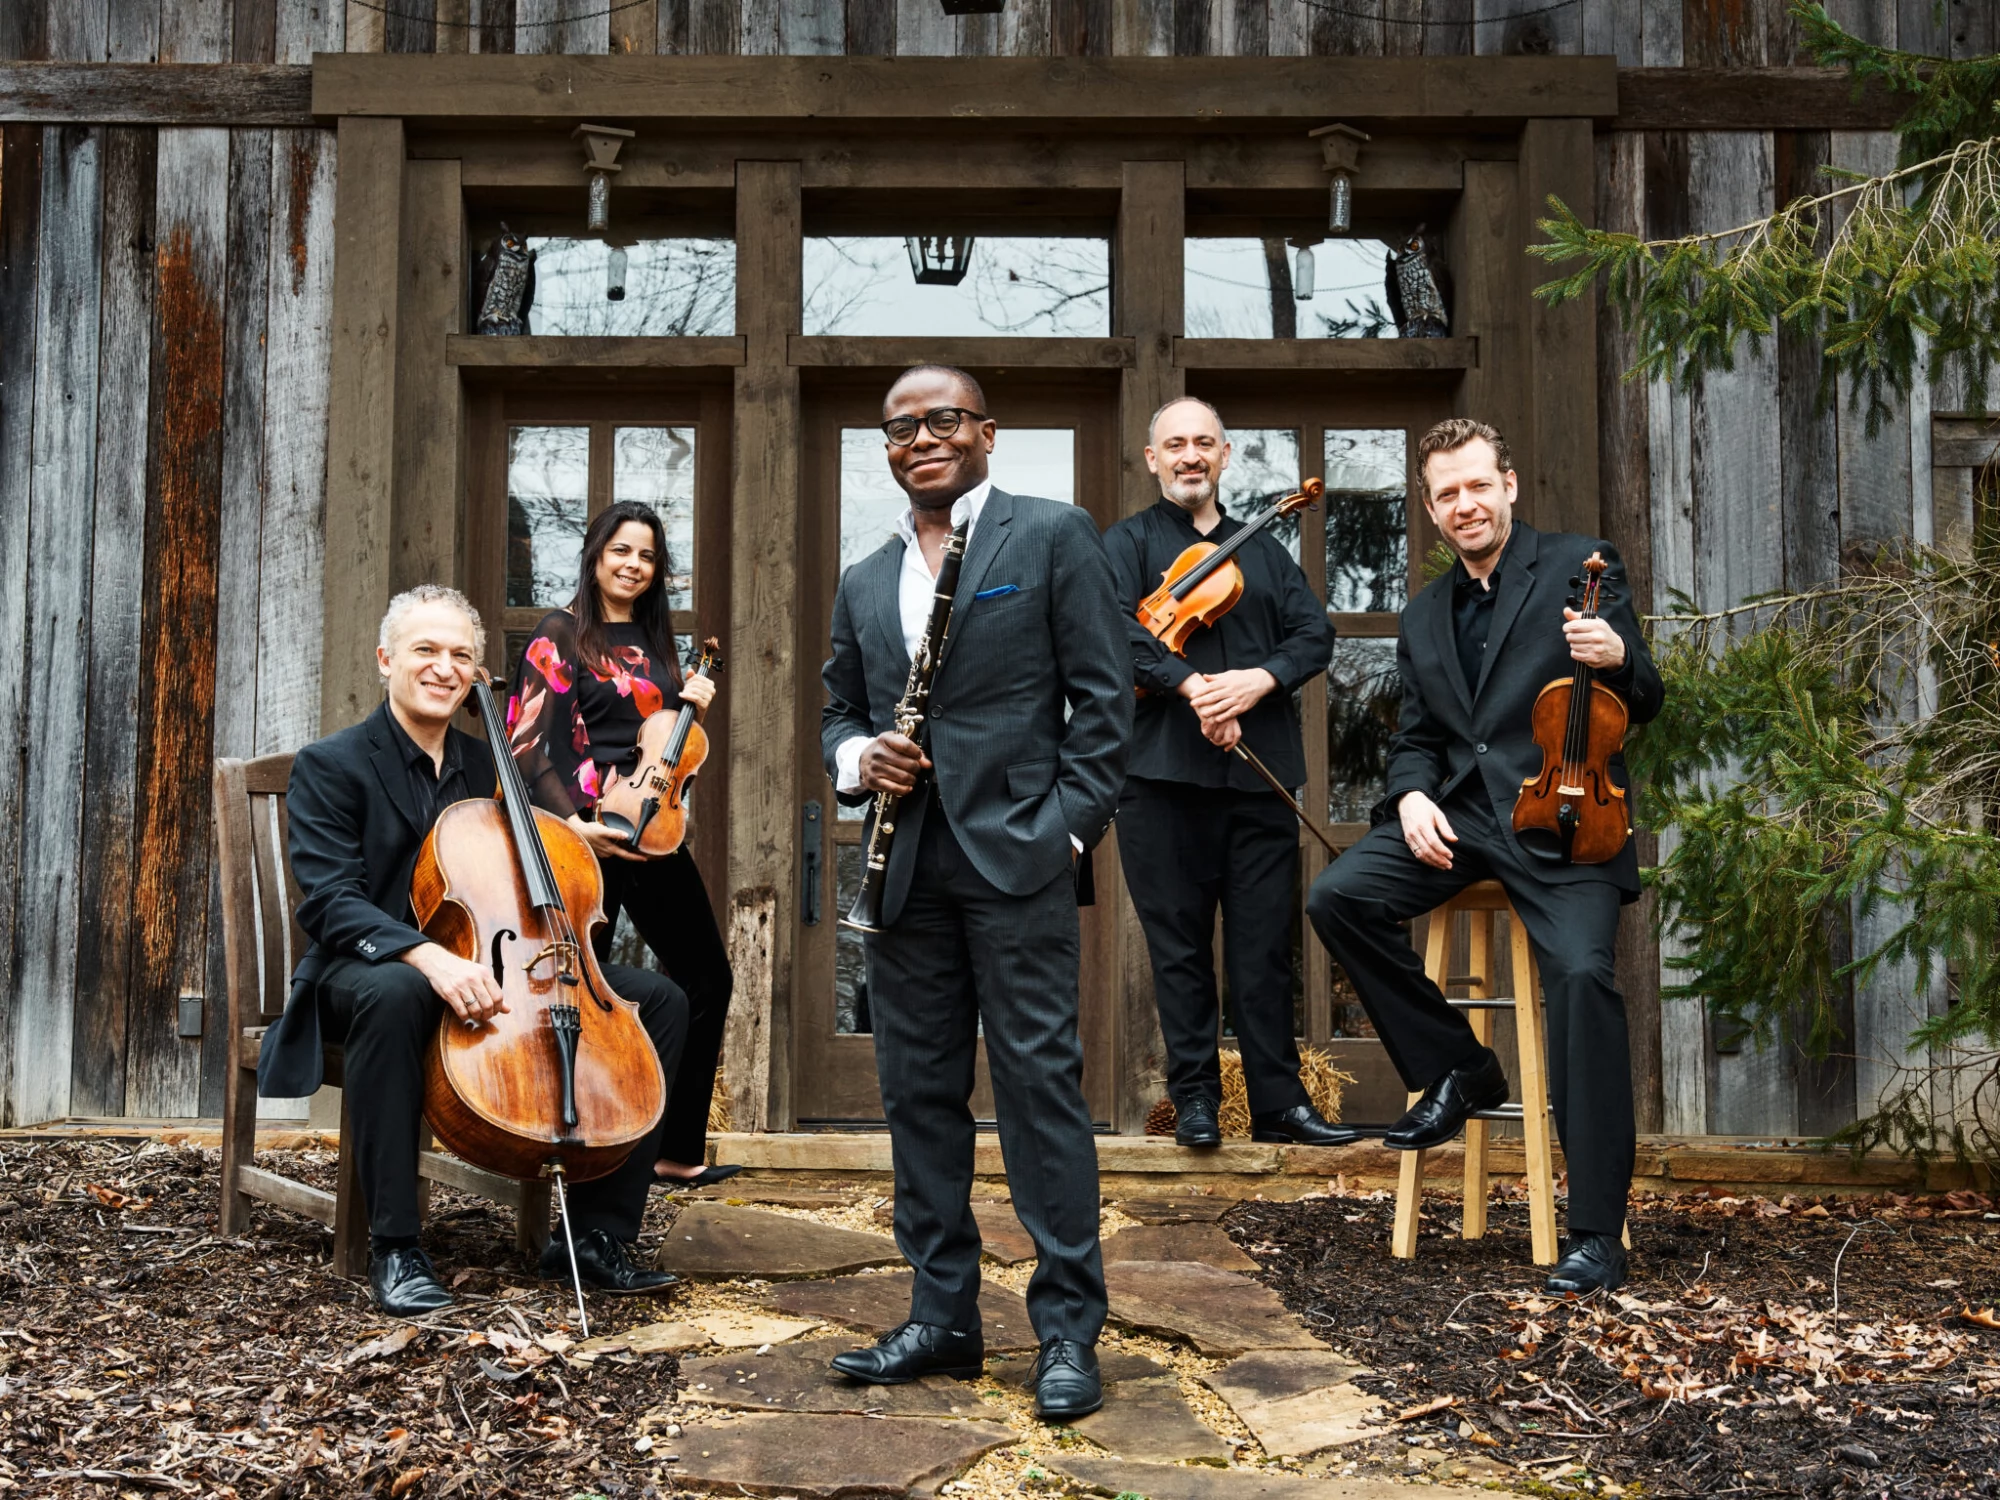 ANTHONY MCGILL & THE PACIFICA QUARTET PHOTO CREDIT: Eric Rudd Photography